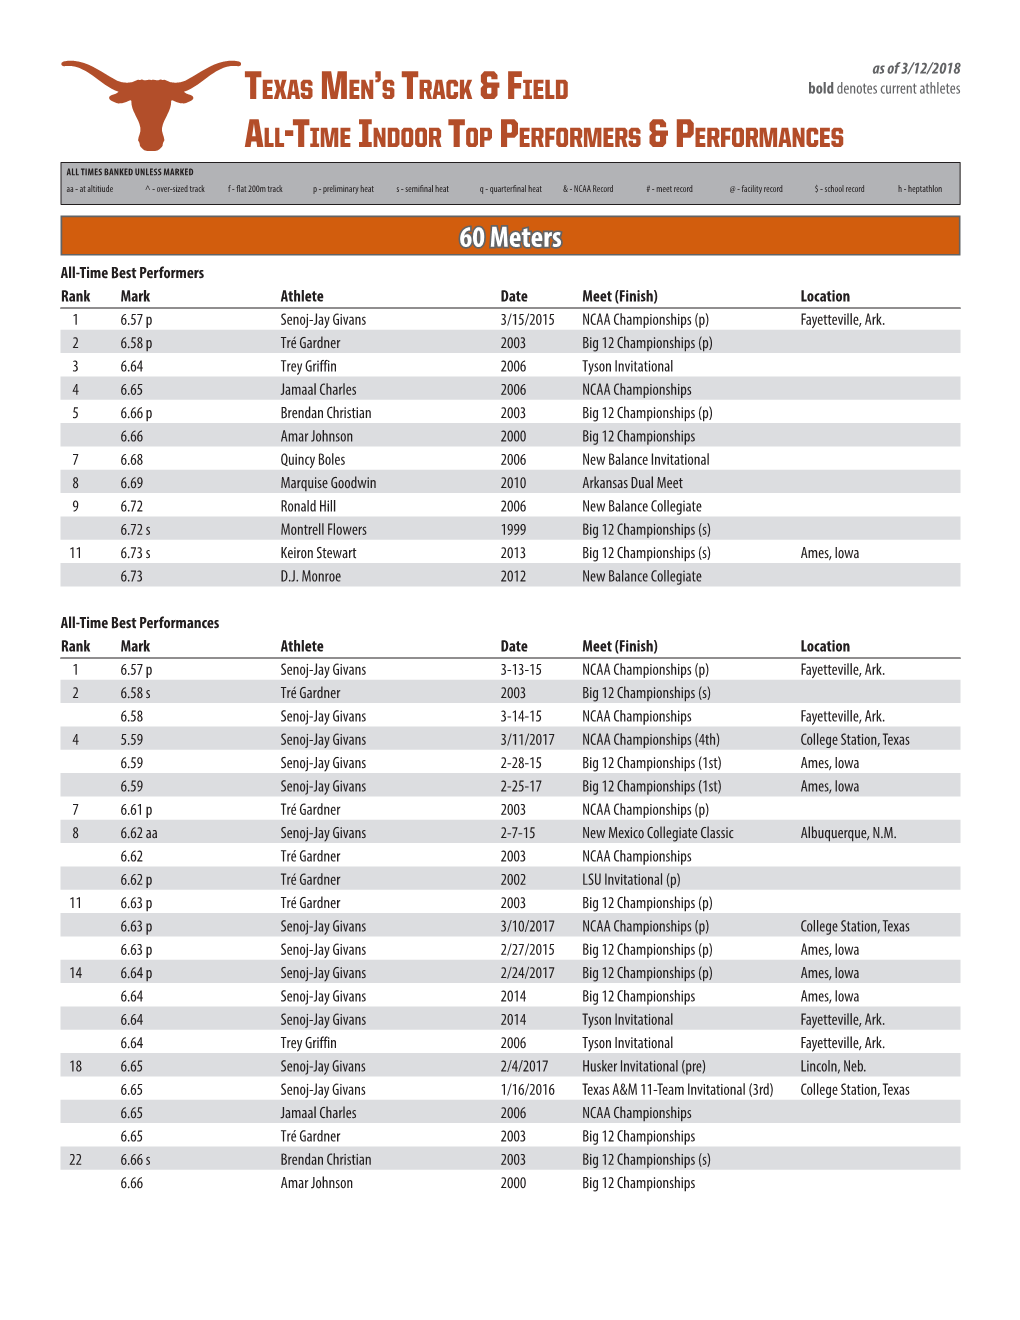 Texas Men's Track & Field All-Time Indoor Top Performers